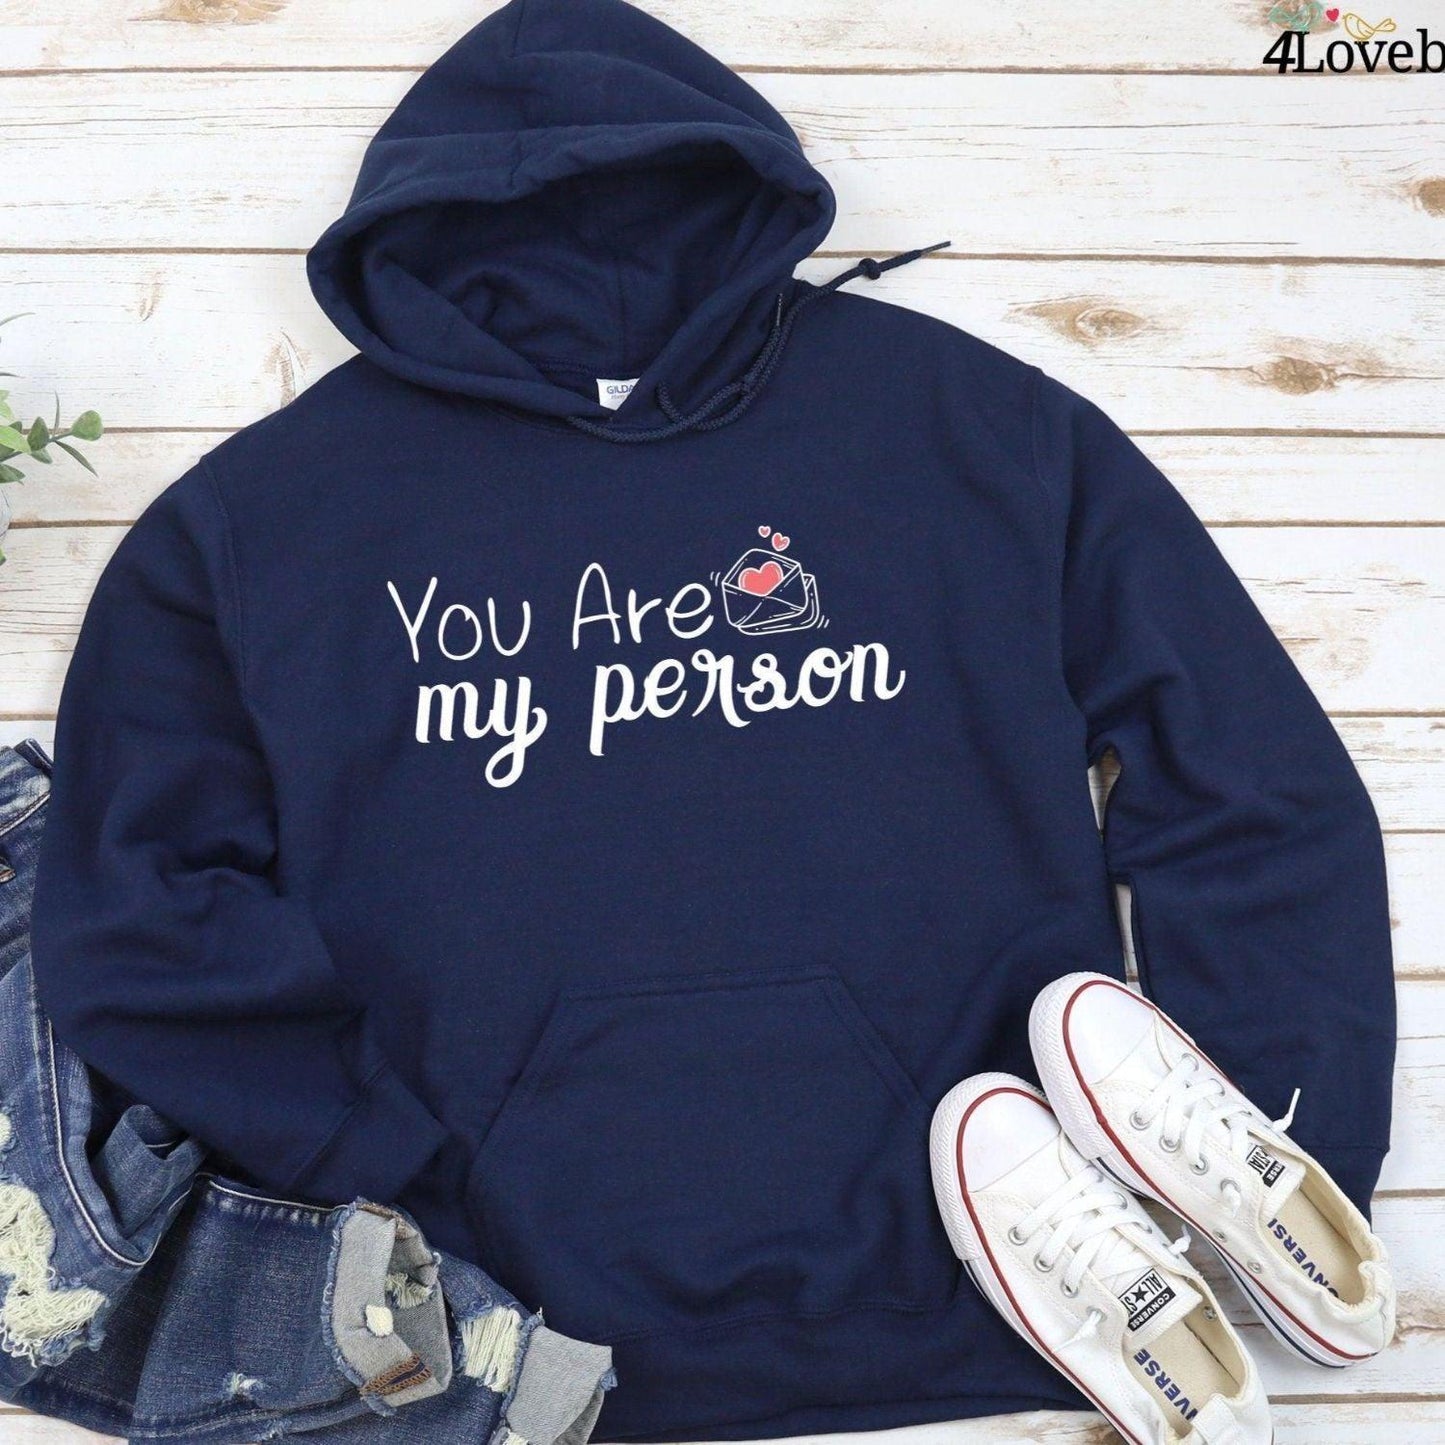 Matching Set for Besties: You Are My Person Hoodie, Sweatshirt, Long Sleeve & Funny Shirts. - 4Lovebirds